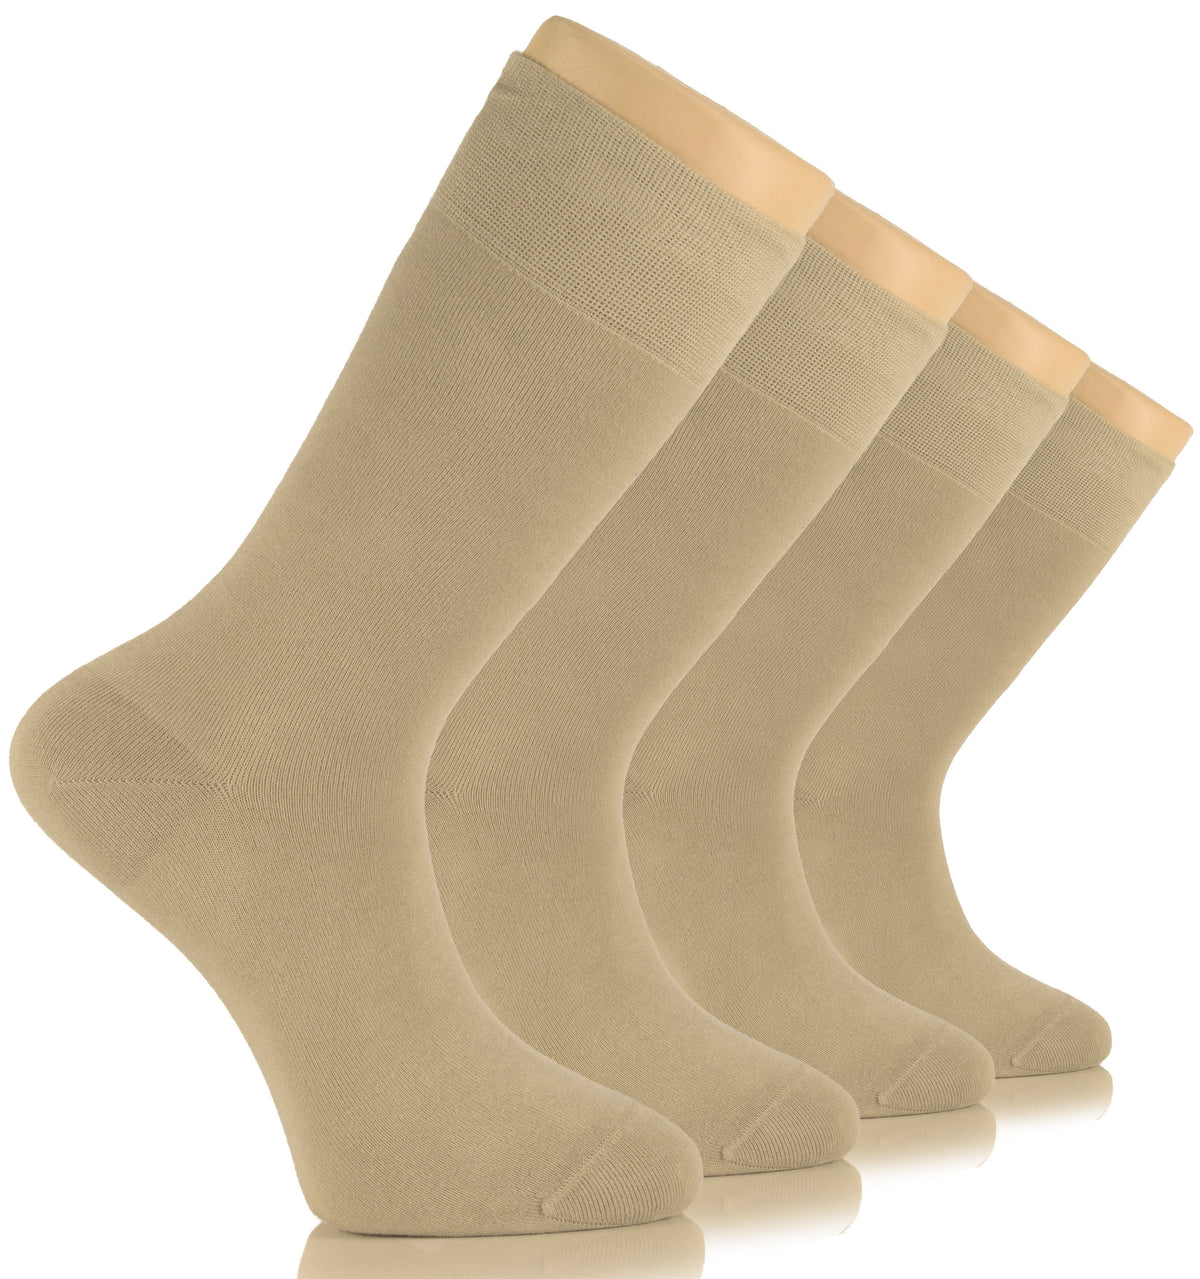 These beige cotton crew socks for men are a must-have for any wardrobe. Made from high-quality cotton, they offer both comfort and style.